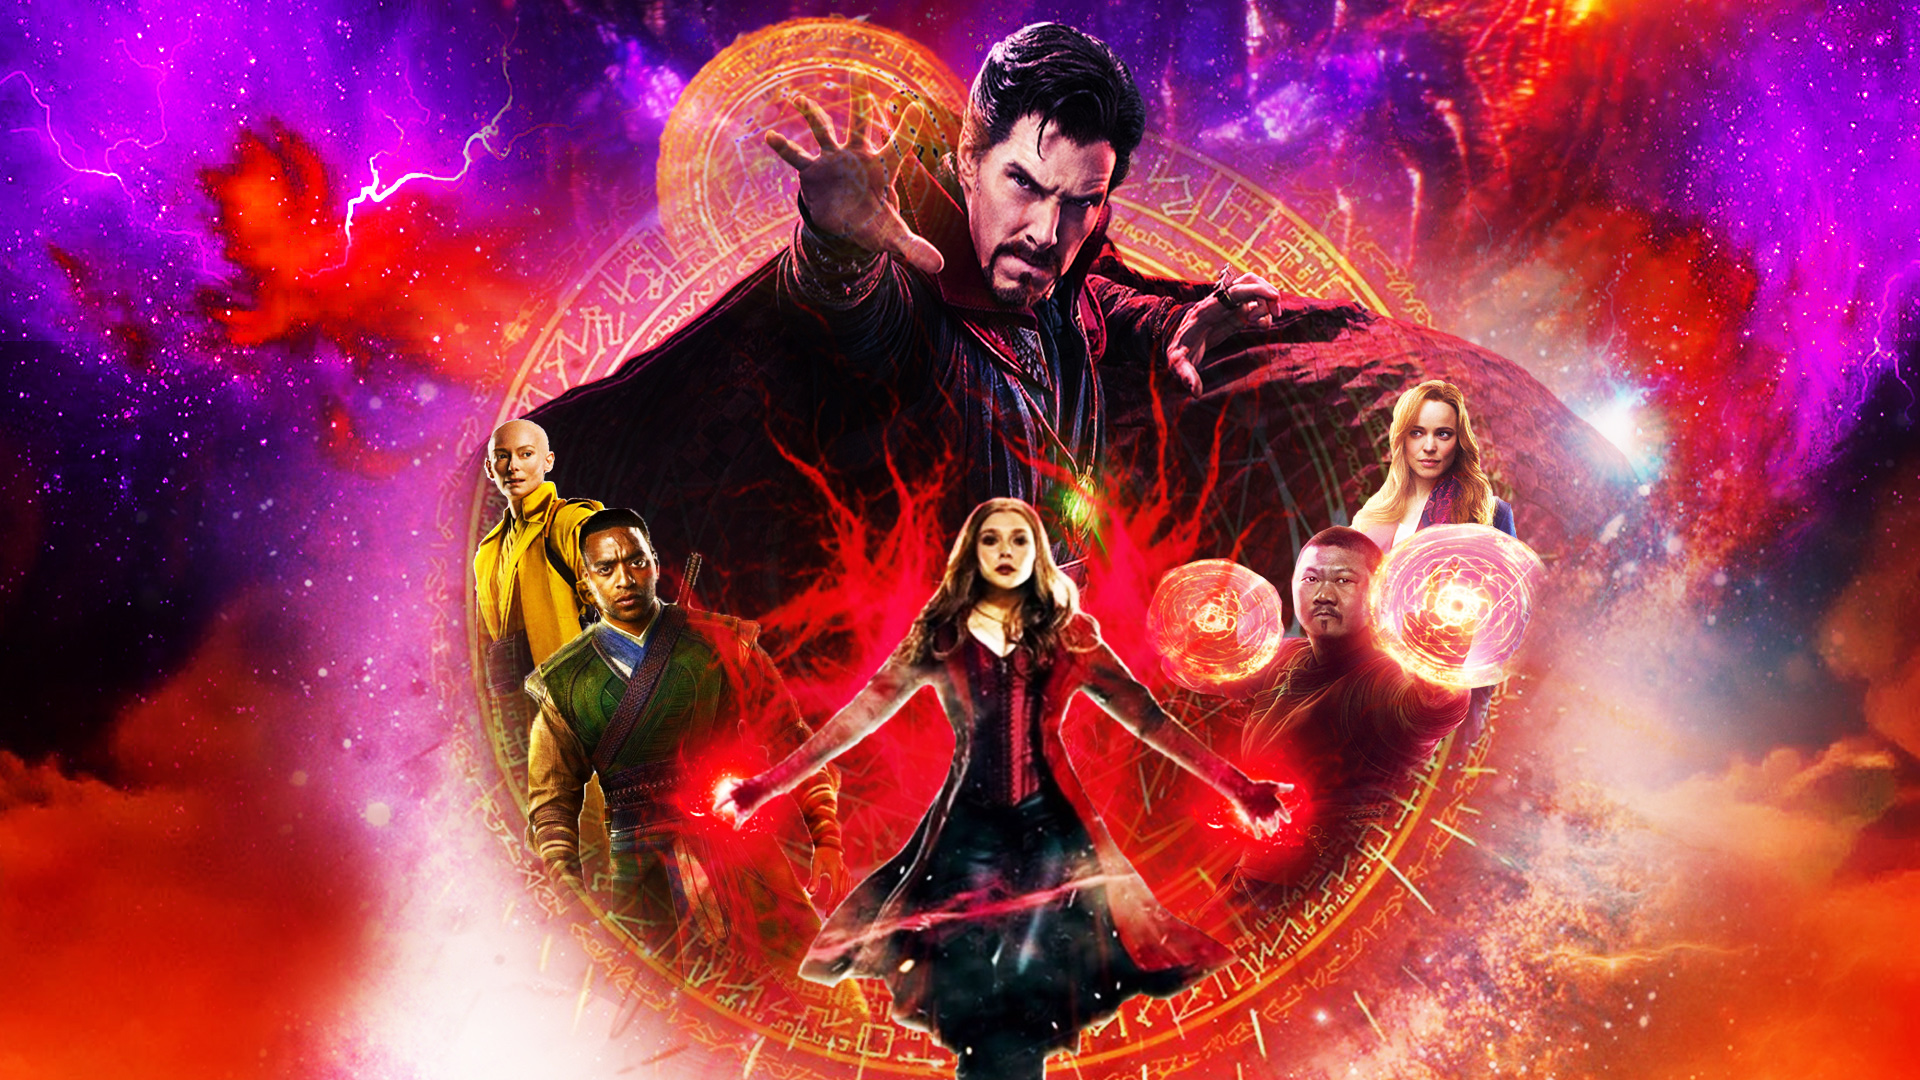 24+] Doctor Strange Multiverse of Madness Wallpapers